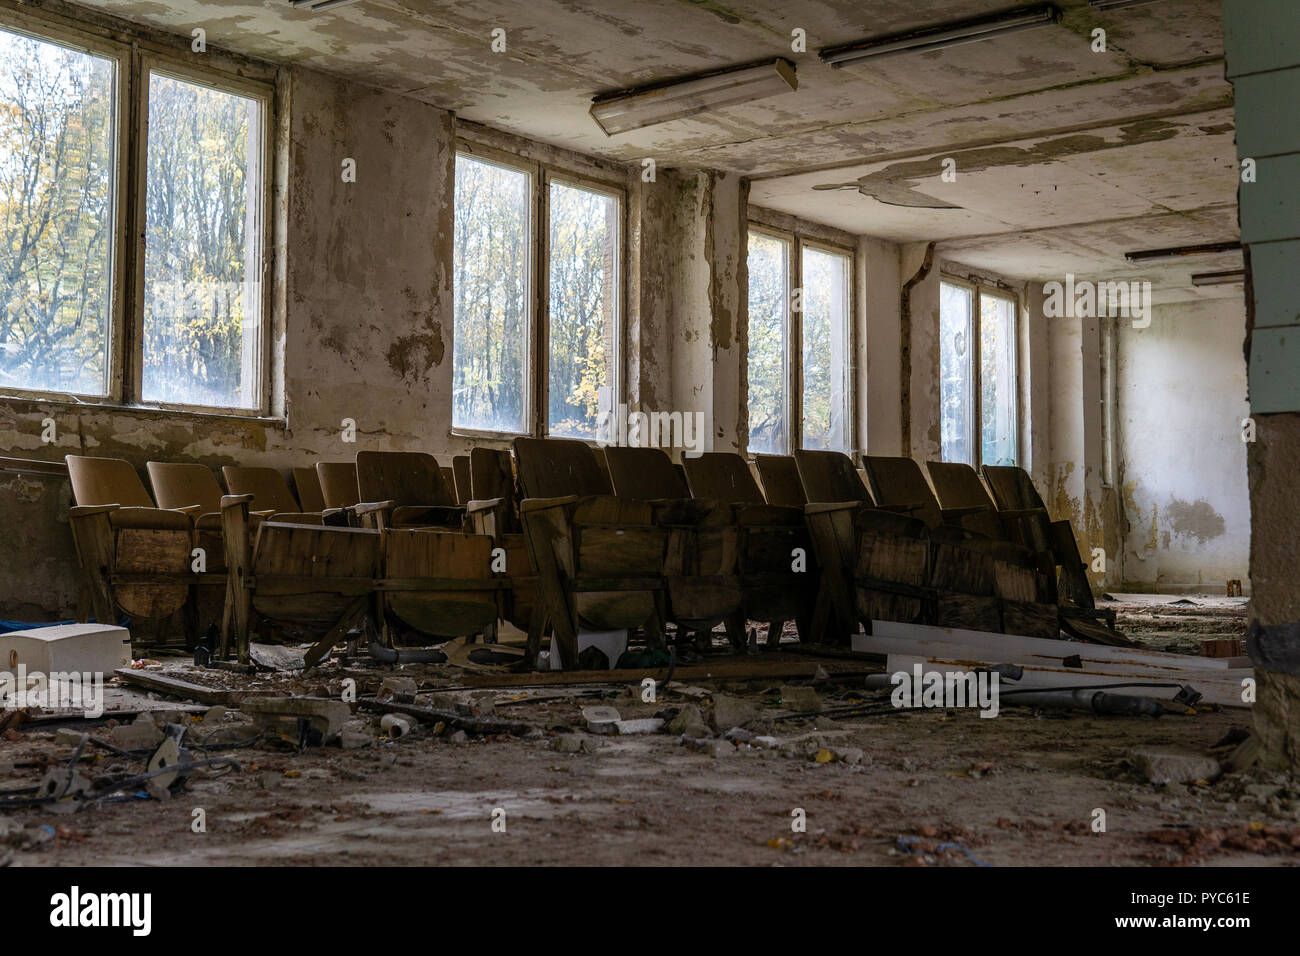 A old, decay, chemical teaching buildung in the czech republic. Stock Photo